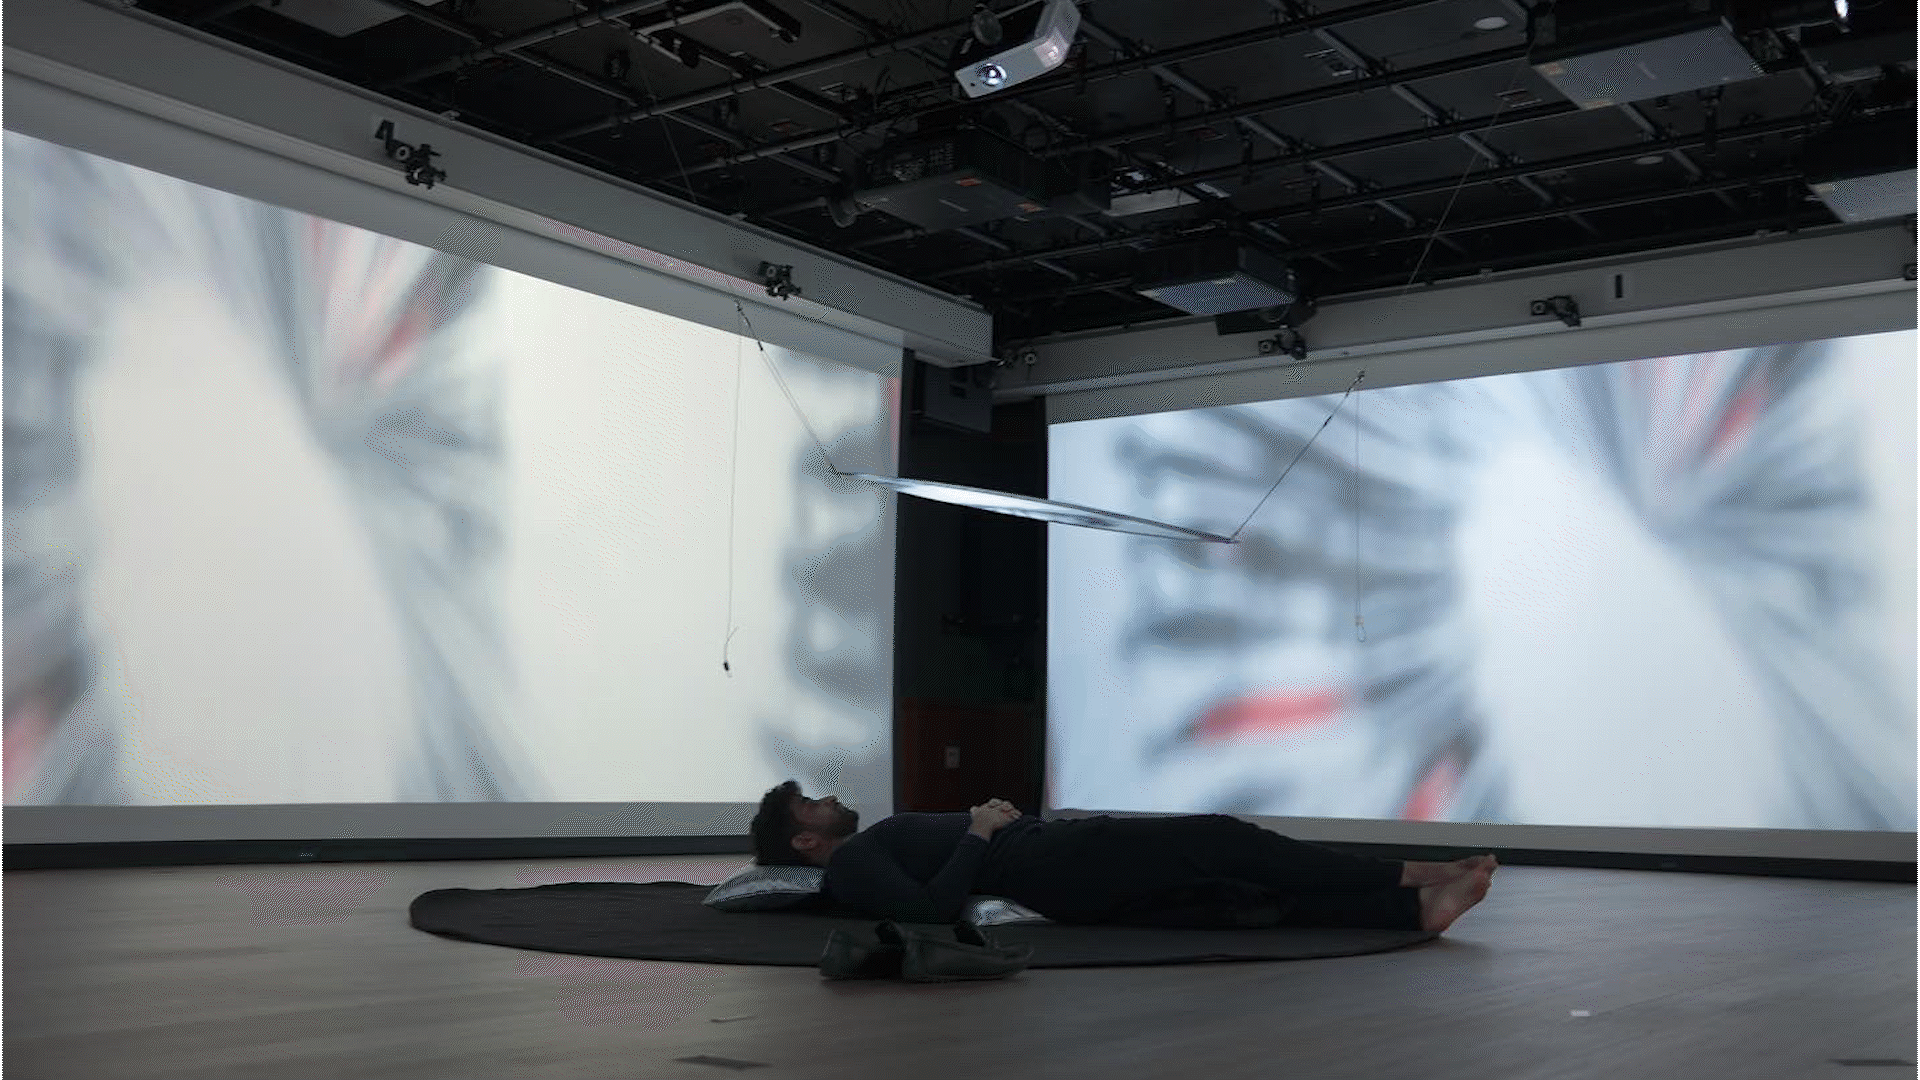 The four-sided projected space is abstractly depicted by posters, floating three wireframe human bodies